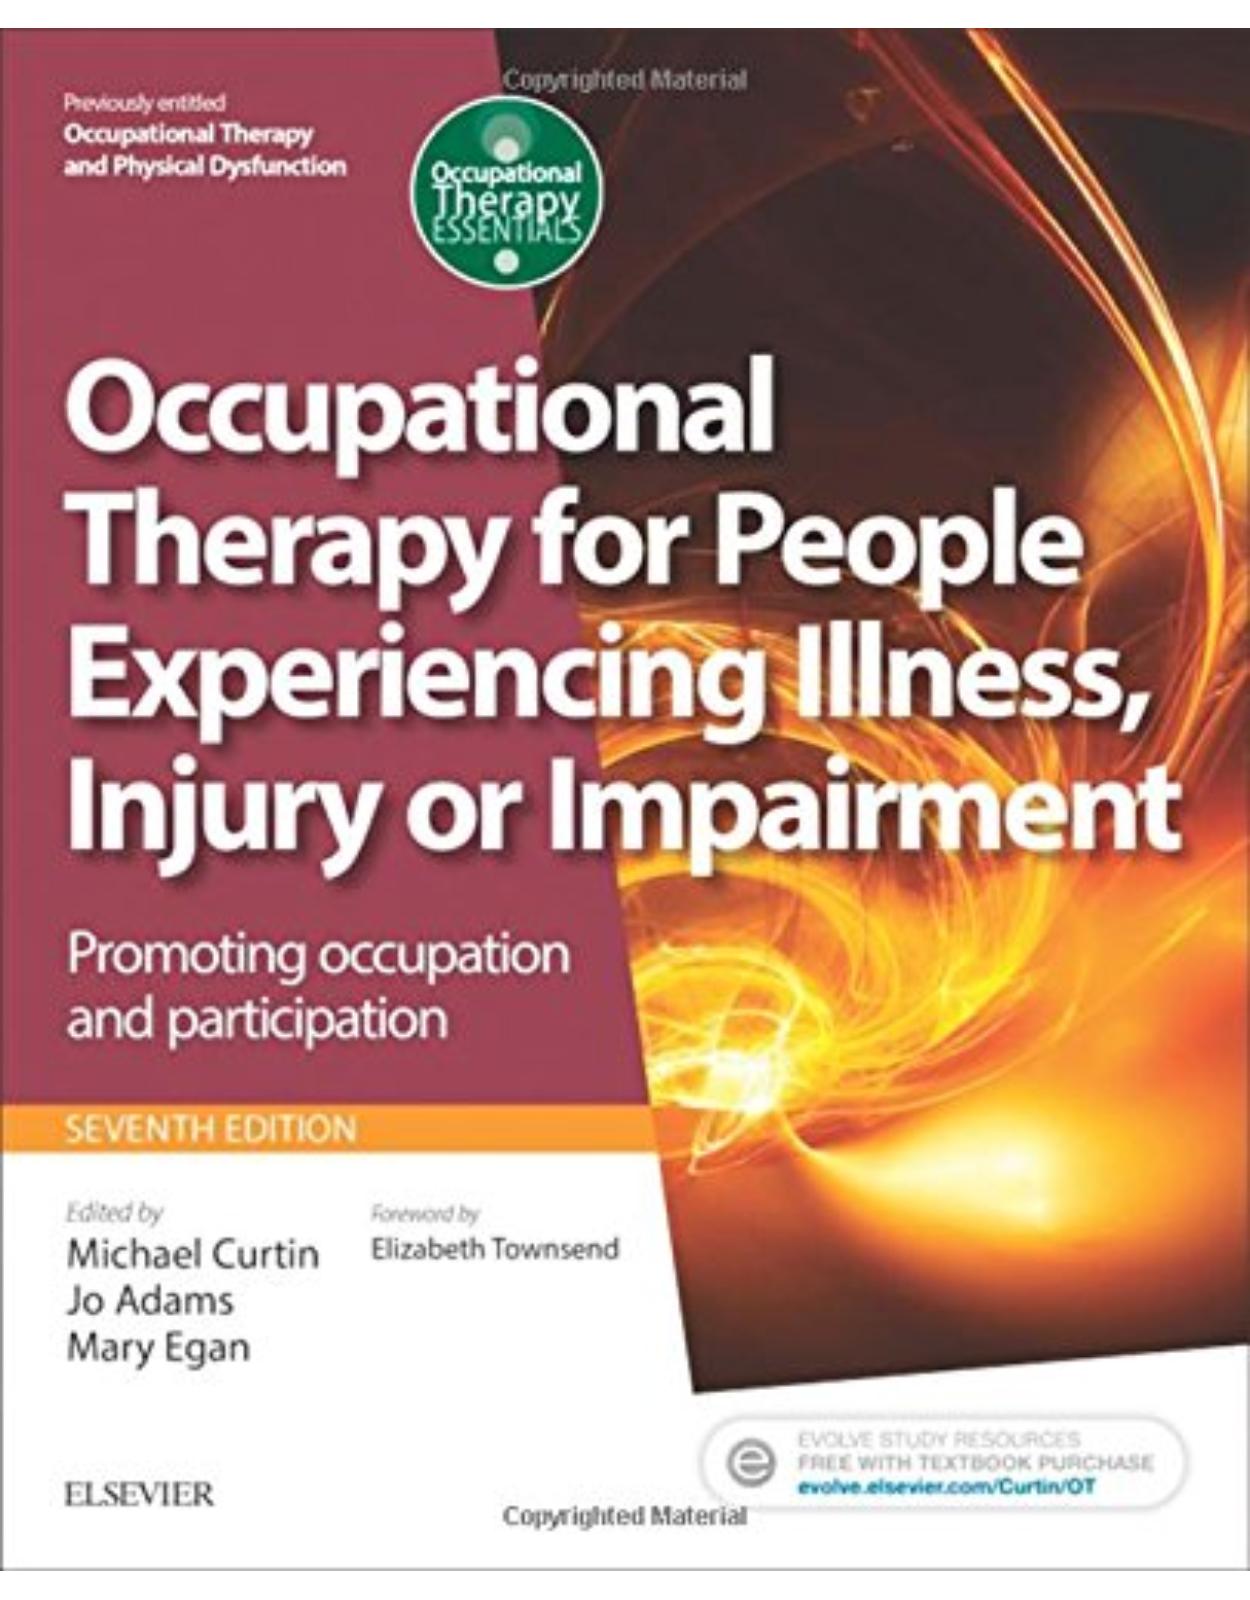 Occupational Therapy and Physical Dysfunction, 7th Edition